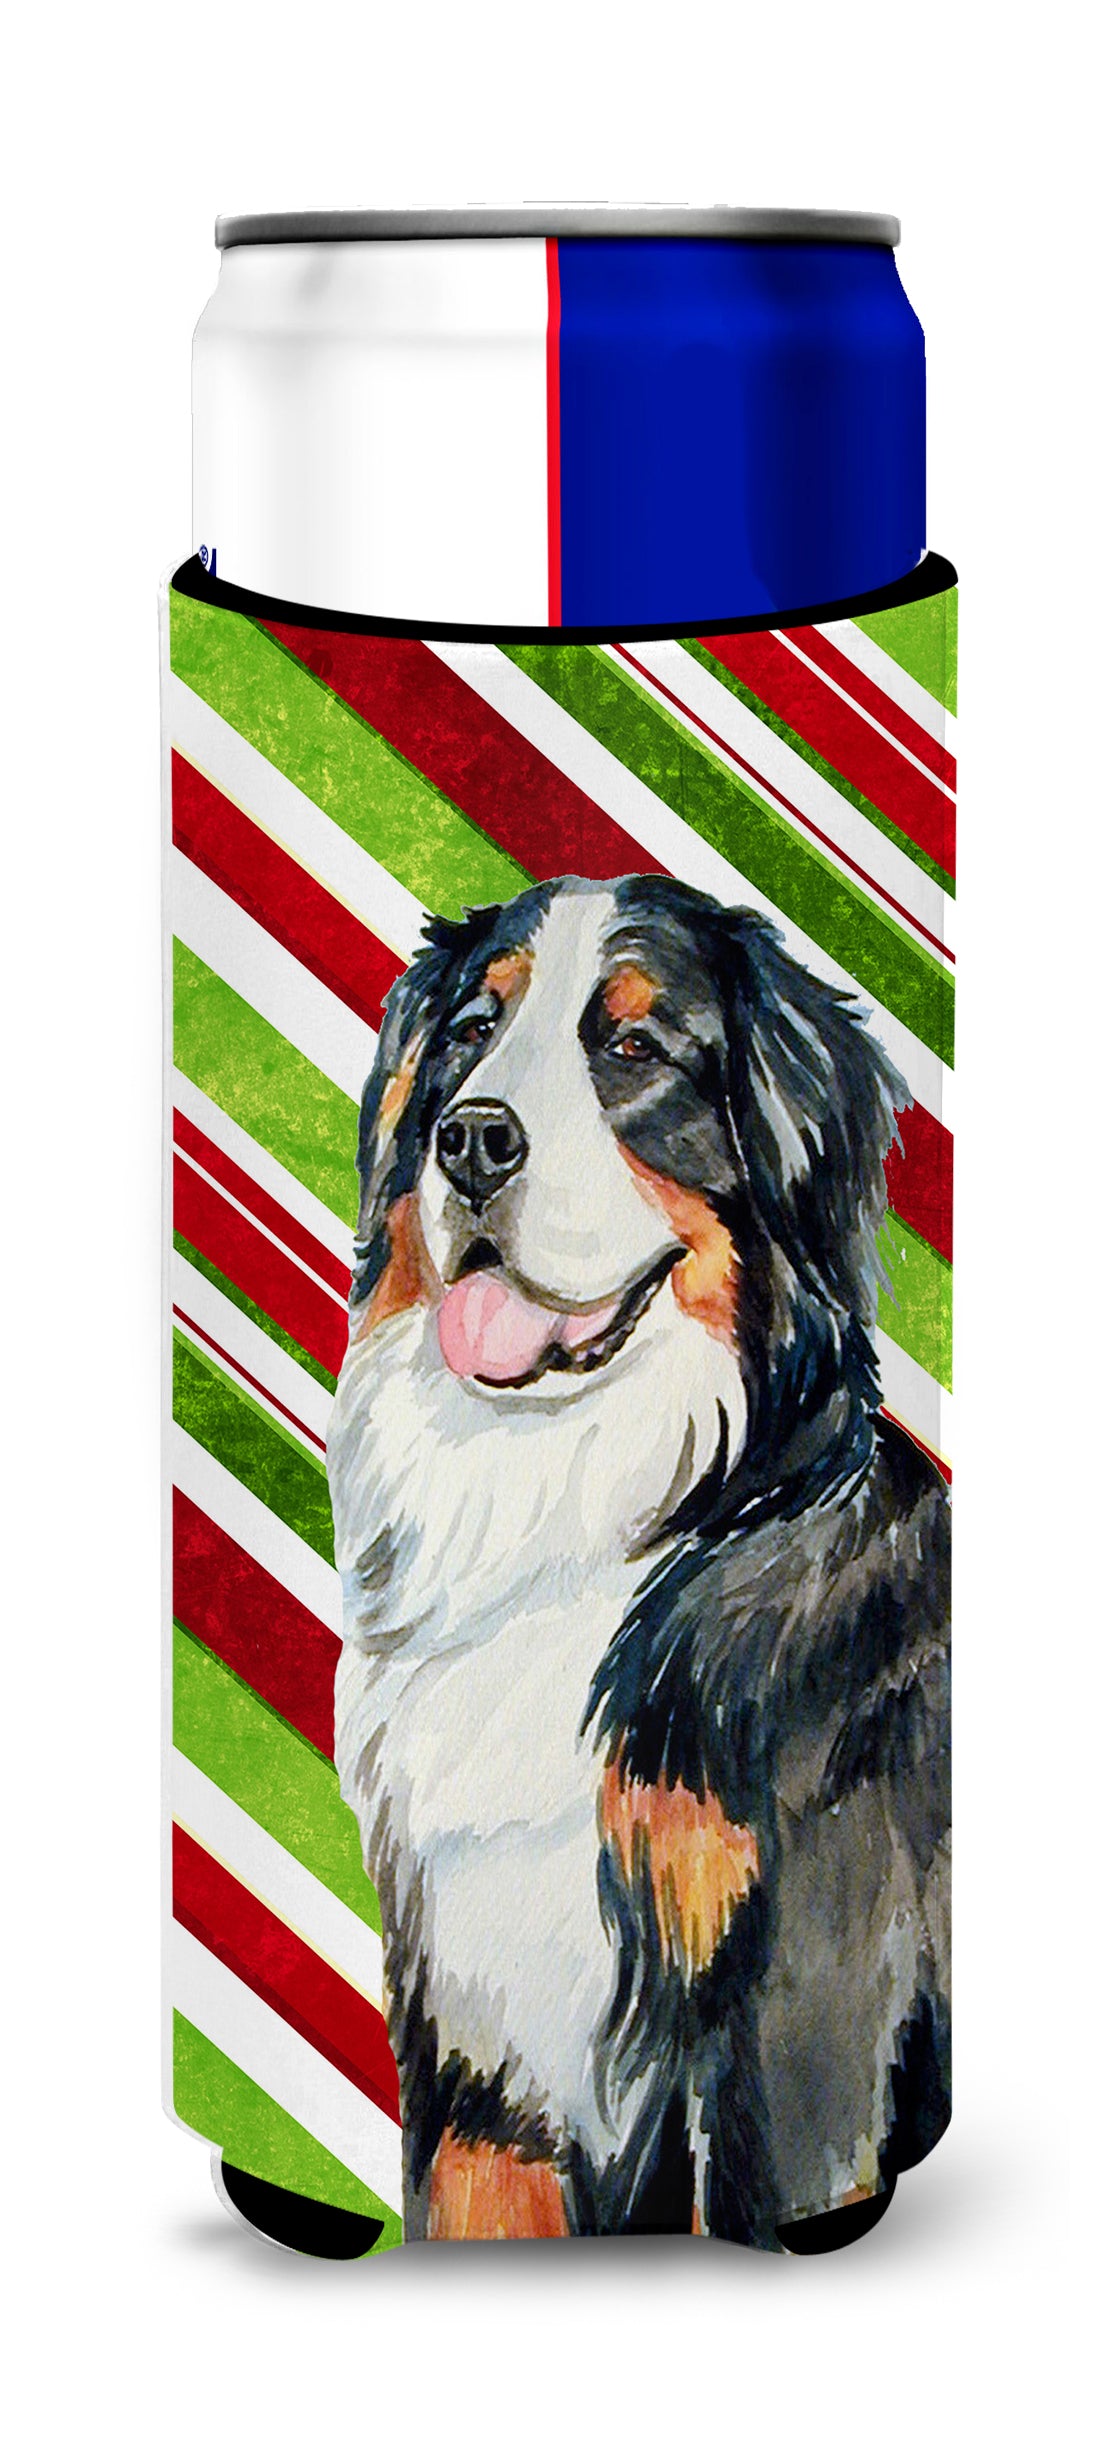 Bernese Mountain Dog Candy Cane Holiday Christmas Ultra Beverage Insulators for slim cans LH9244MUK.